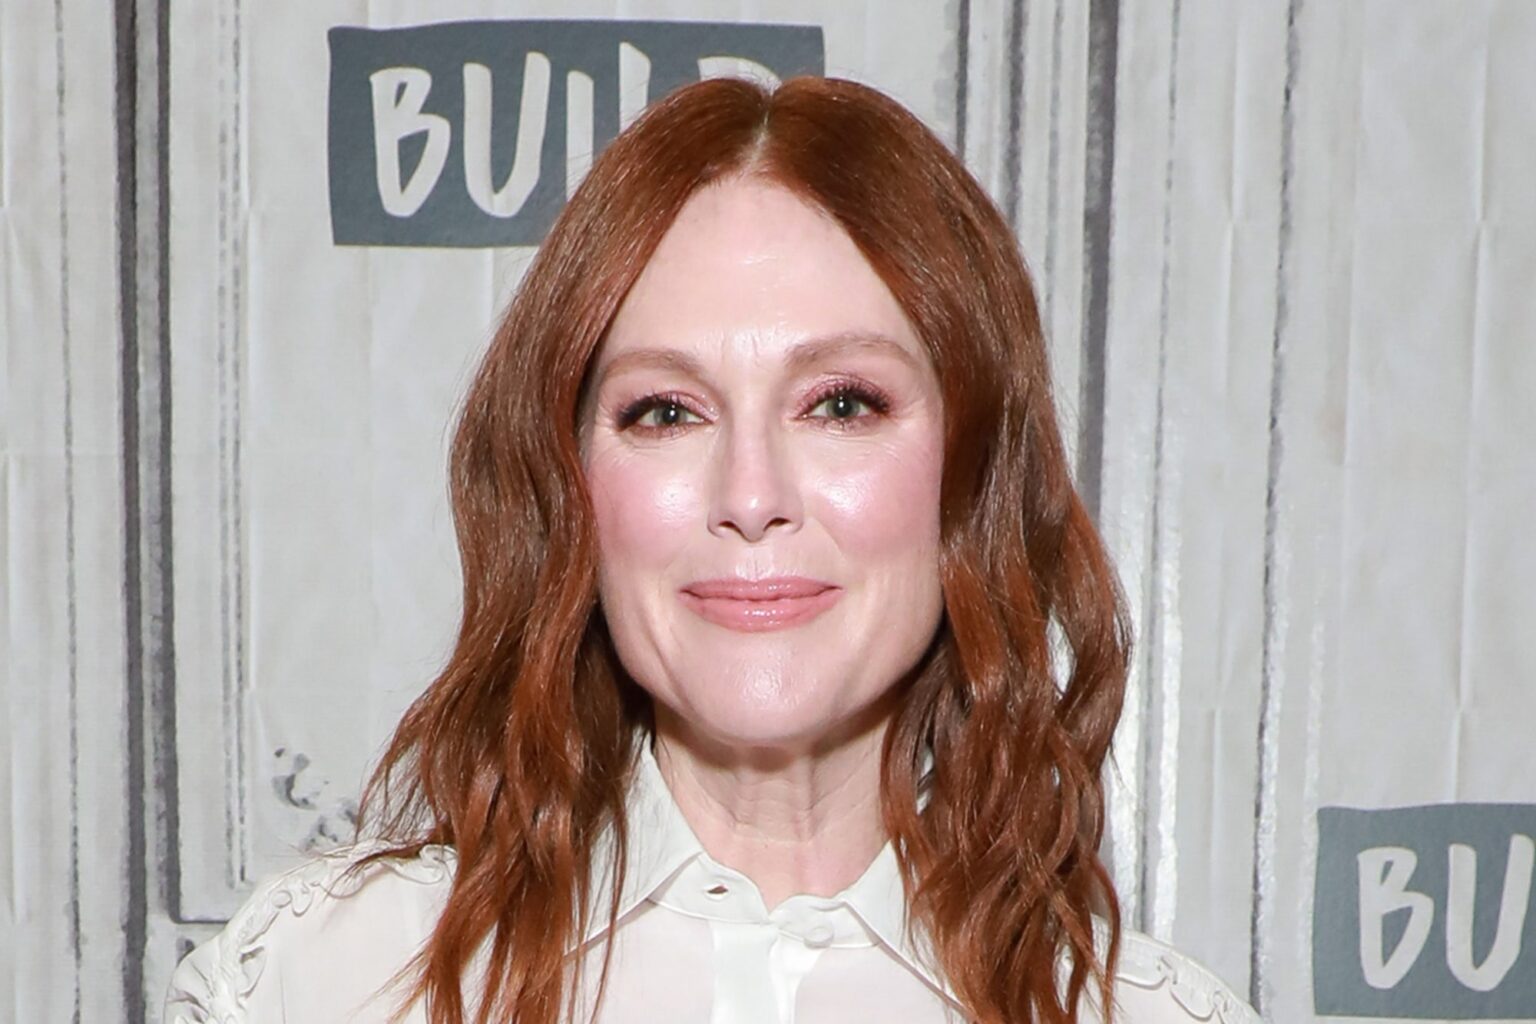 Julianne Moore has not let age slow her down. Learn about her skincare routine and her trips on how to stay radiant.